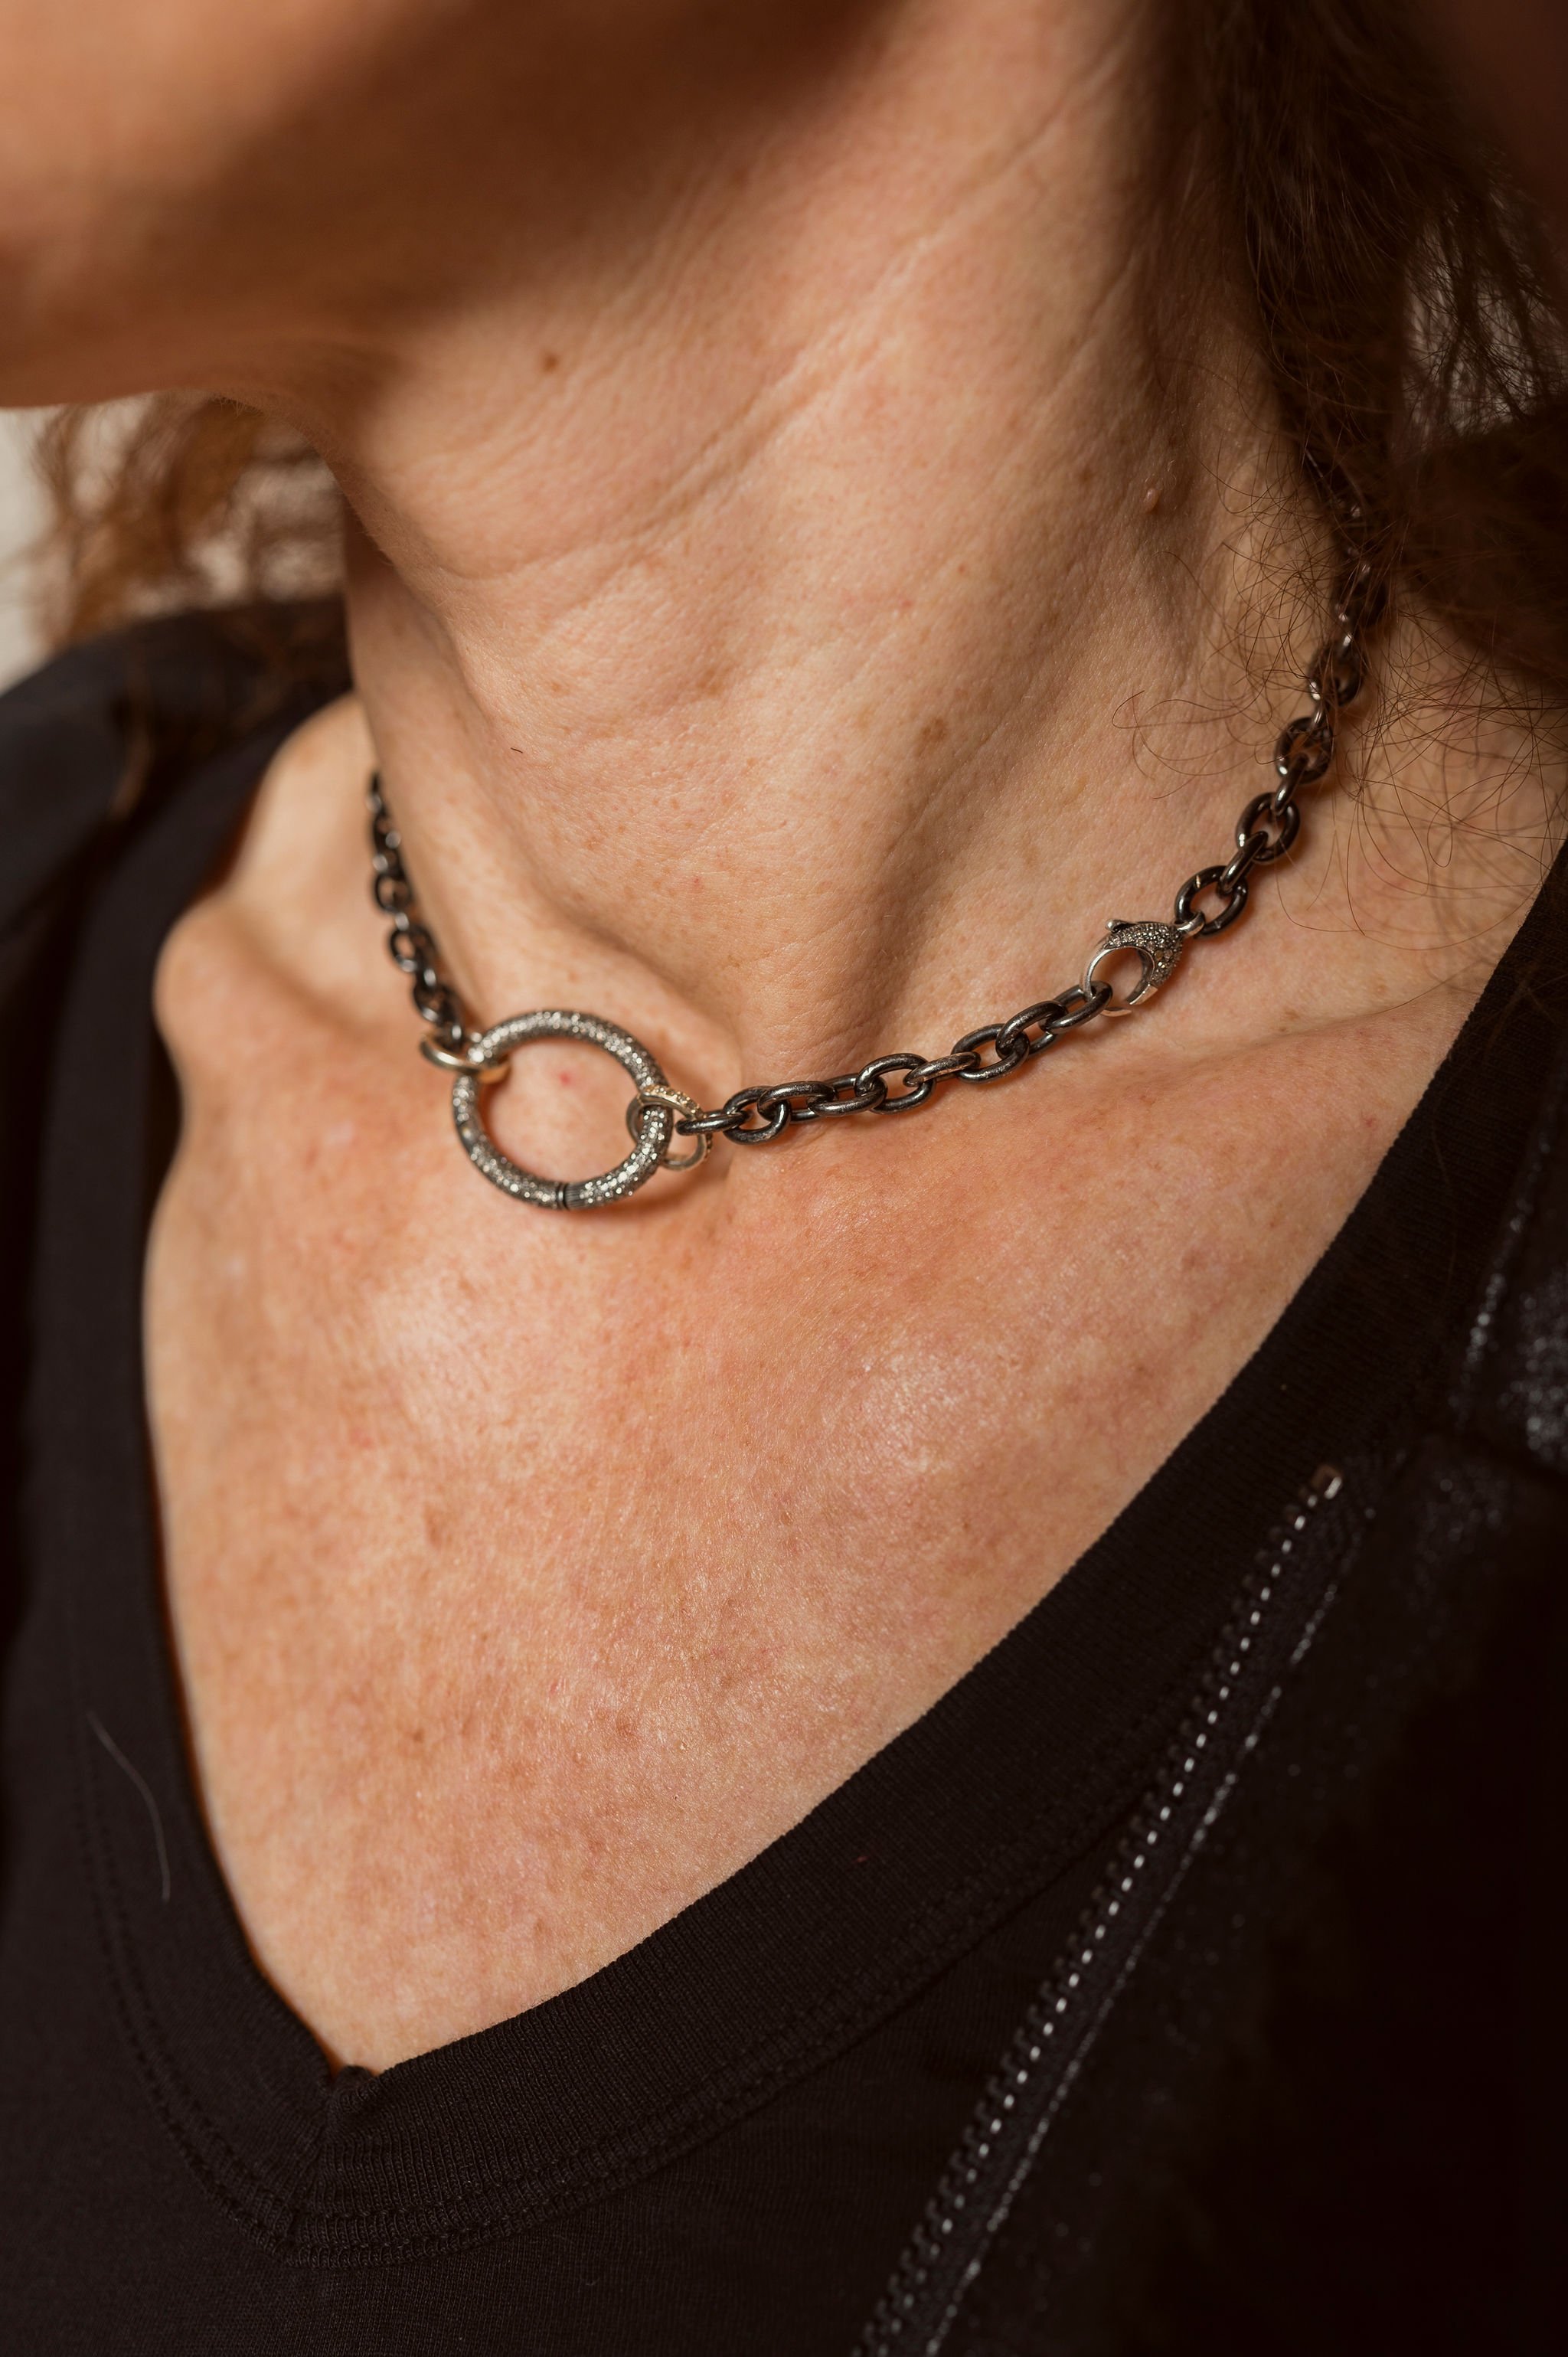 Simple chain-style necklace